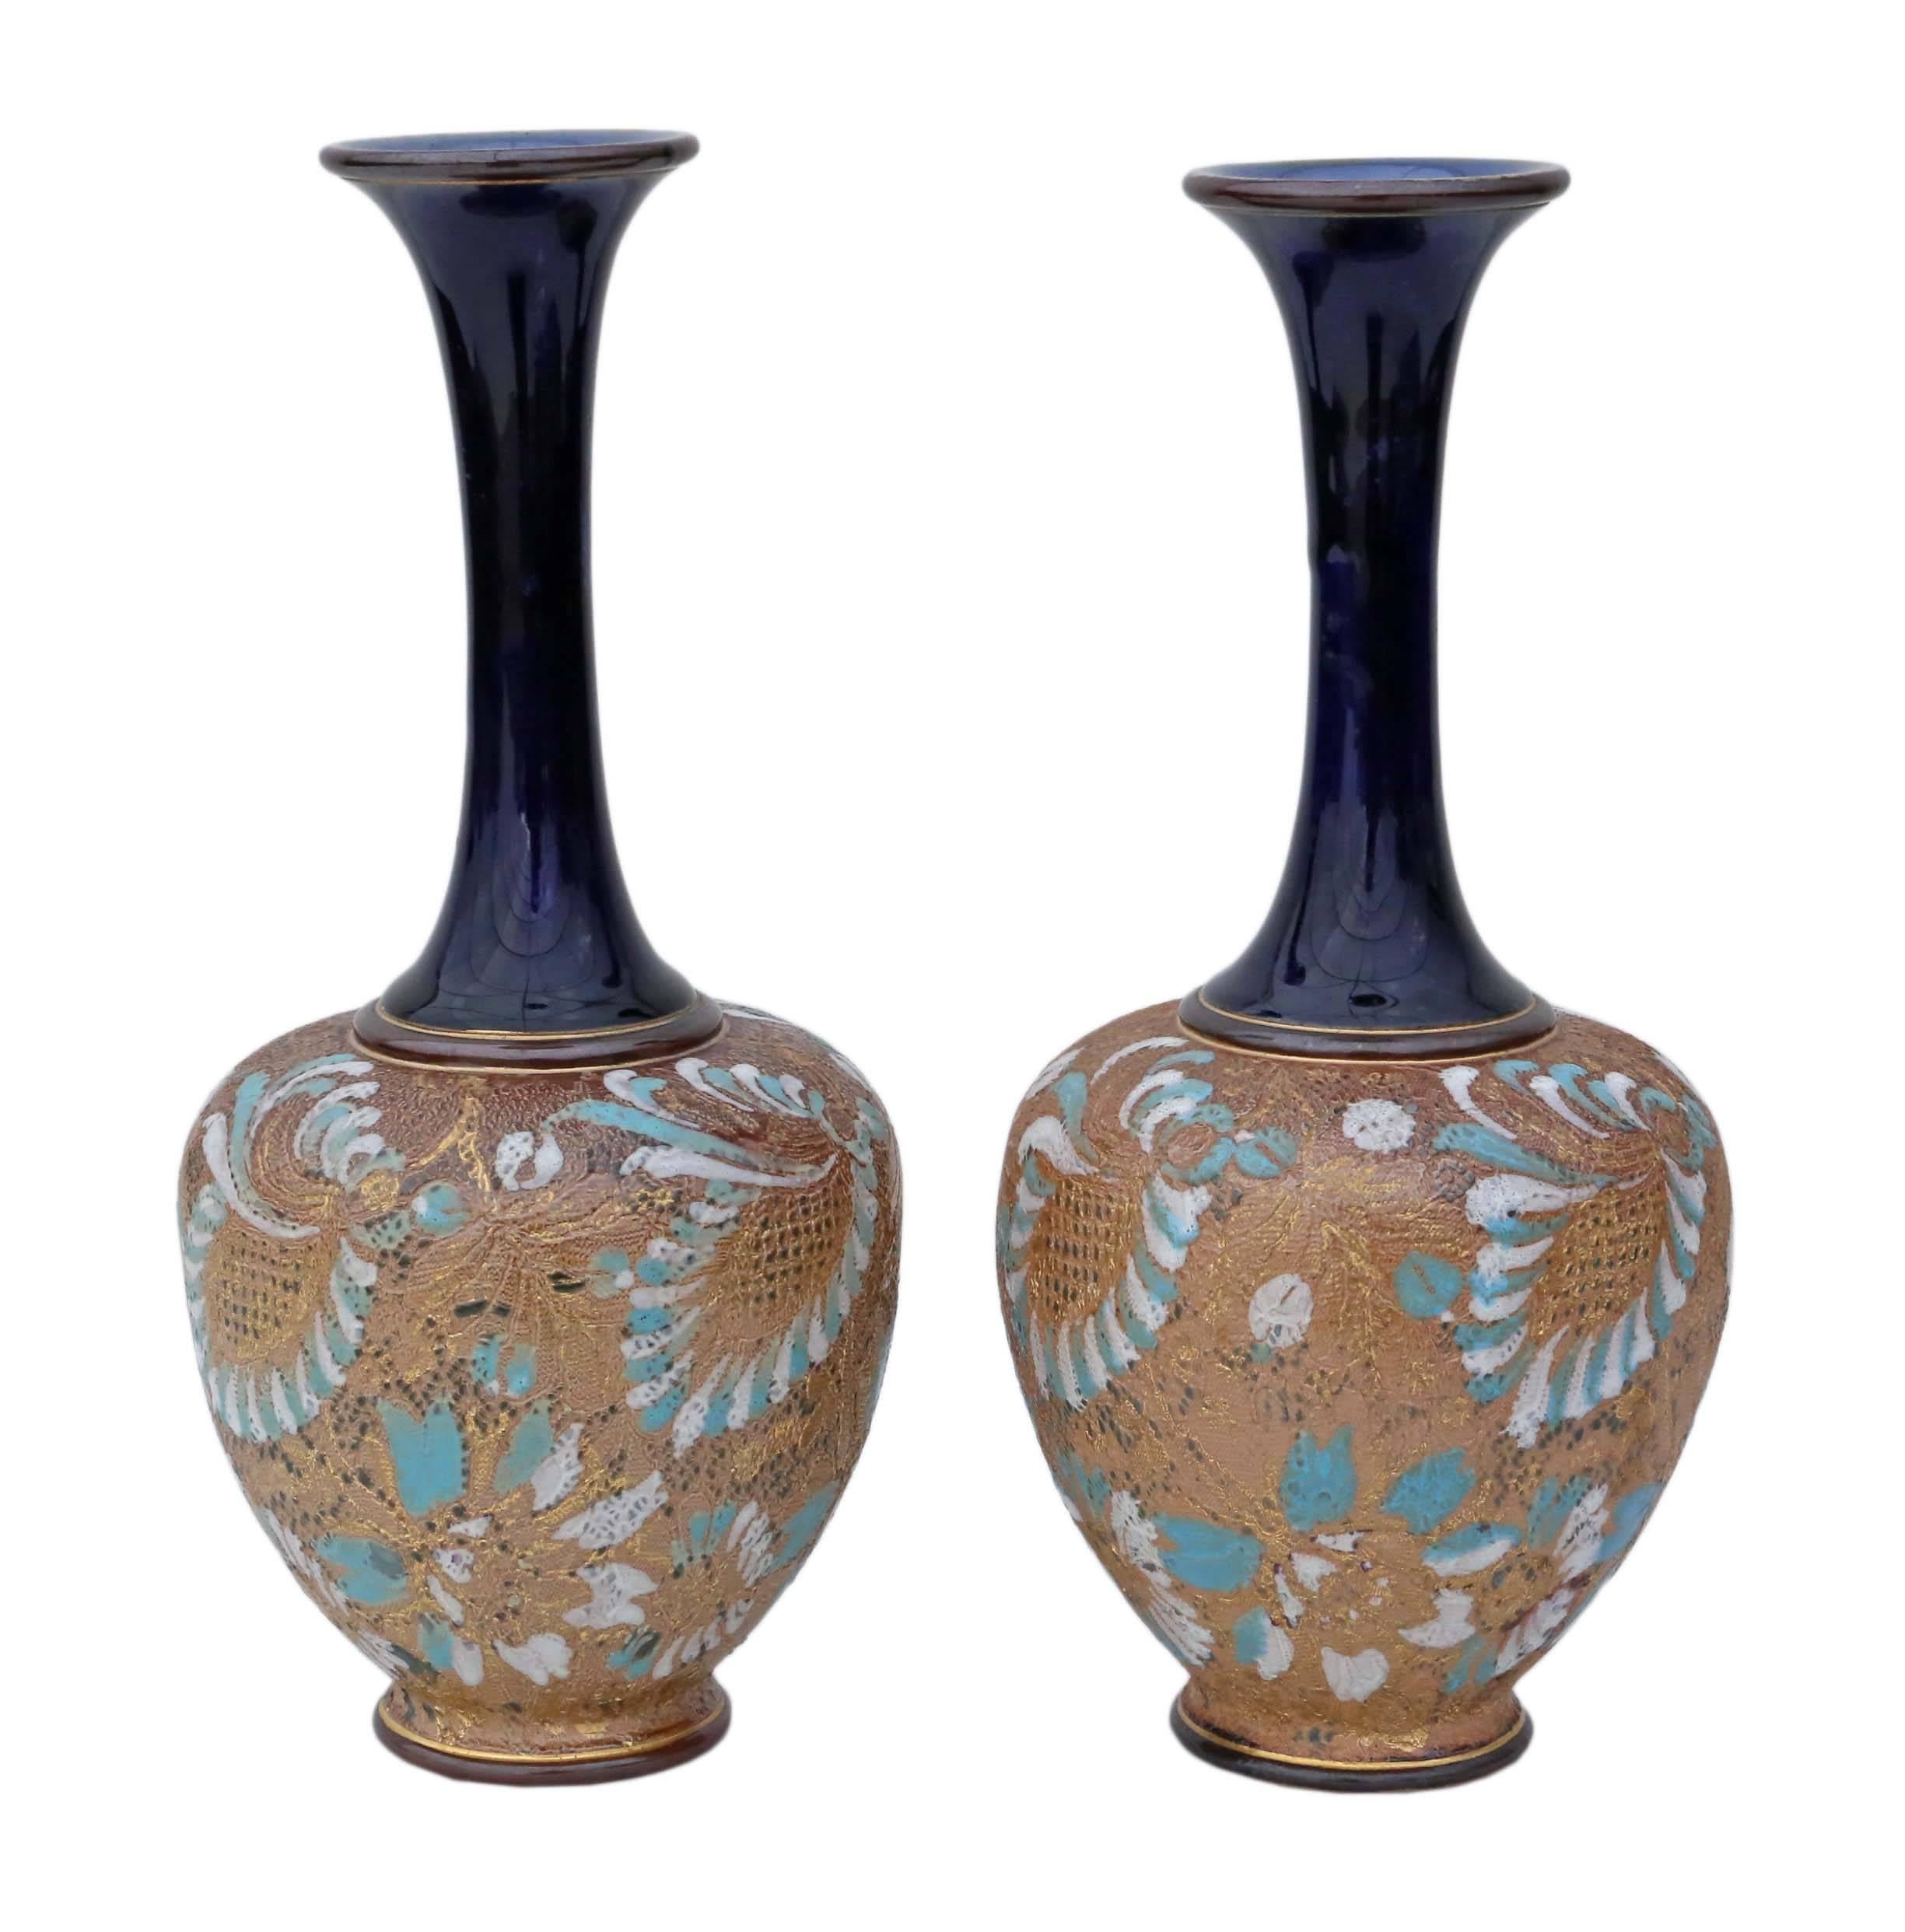 Antique pair of Royal Doulton slater vases. Art Nouveau, dating from circa 1900-1920 (possibly 1912). 

Lovely quality vases. A touch of class.

Would look amazing in the right location!

Overall maximum dimensions: 12 cm diameter x 26 cm